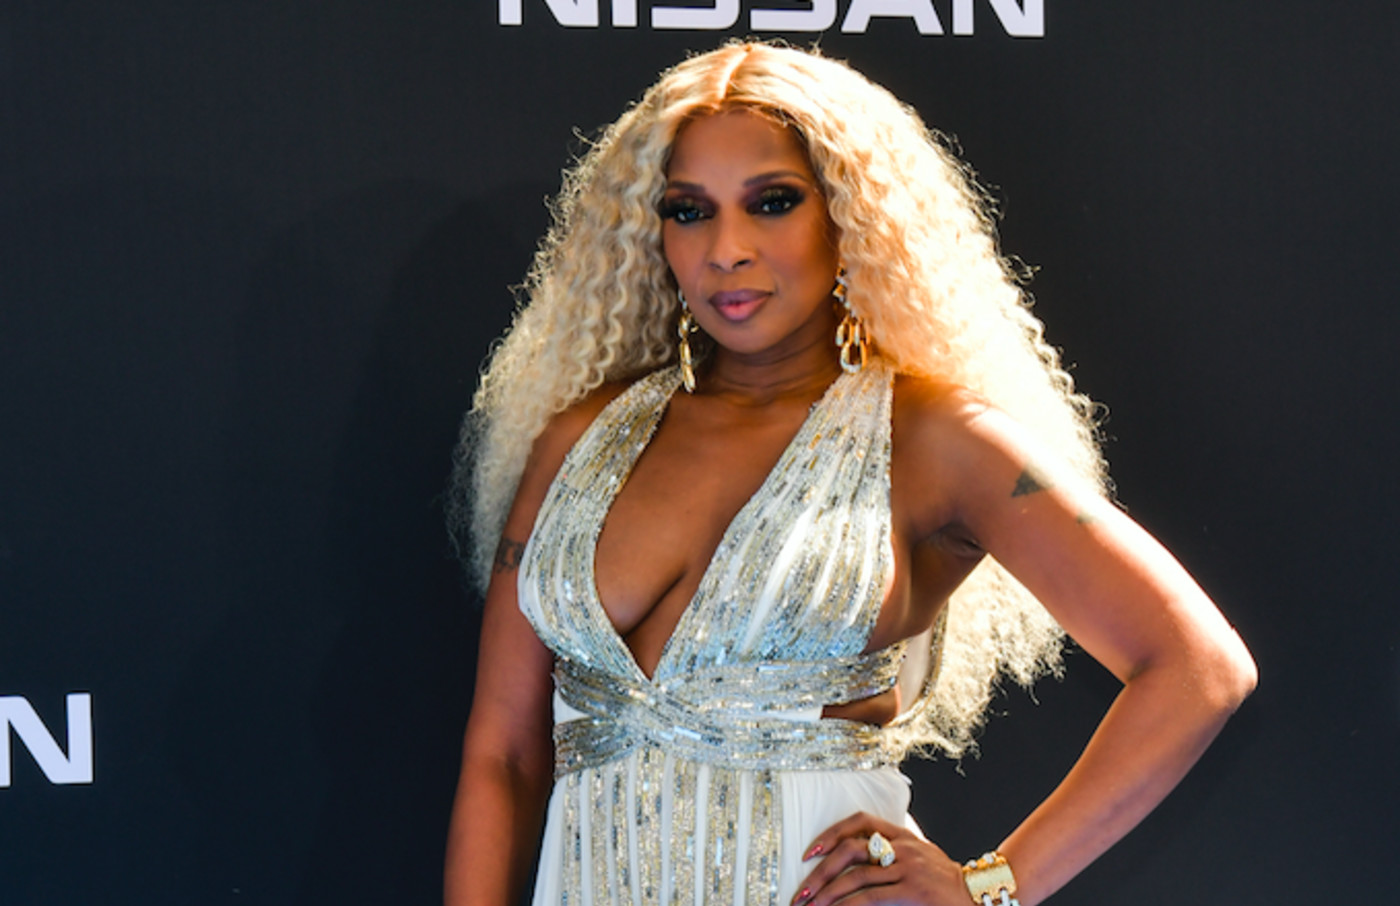 Mary J Blige Tour Dates 2022 / 2023, Why Mary J Blige Famous For